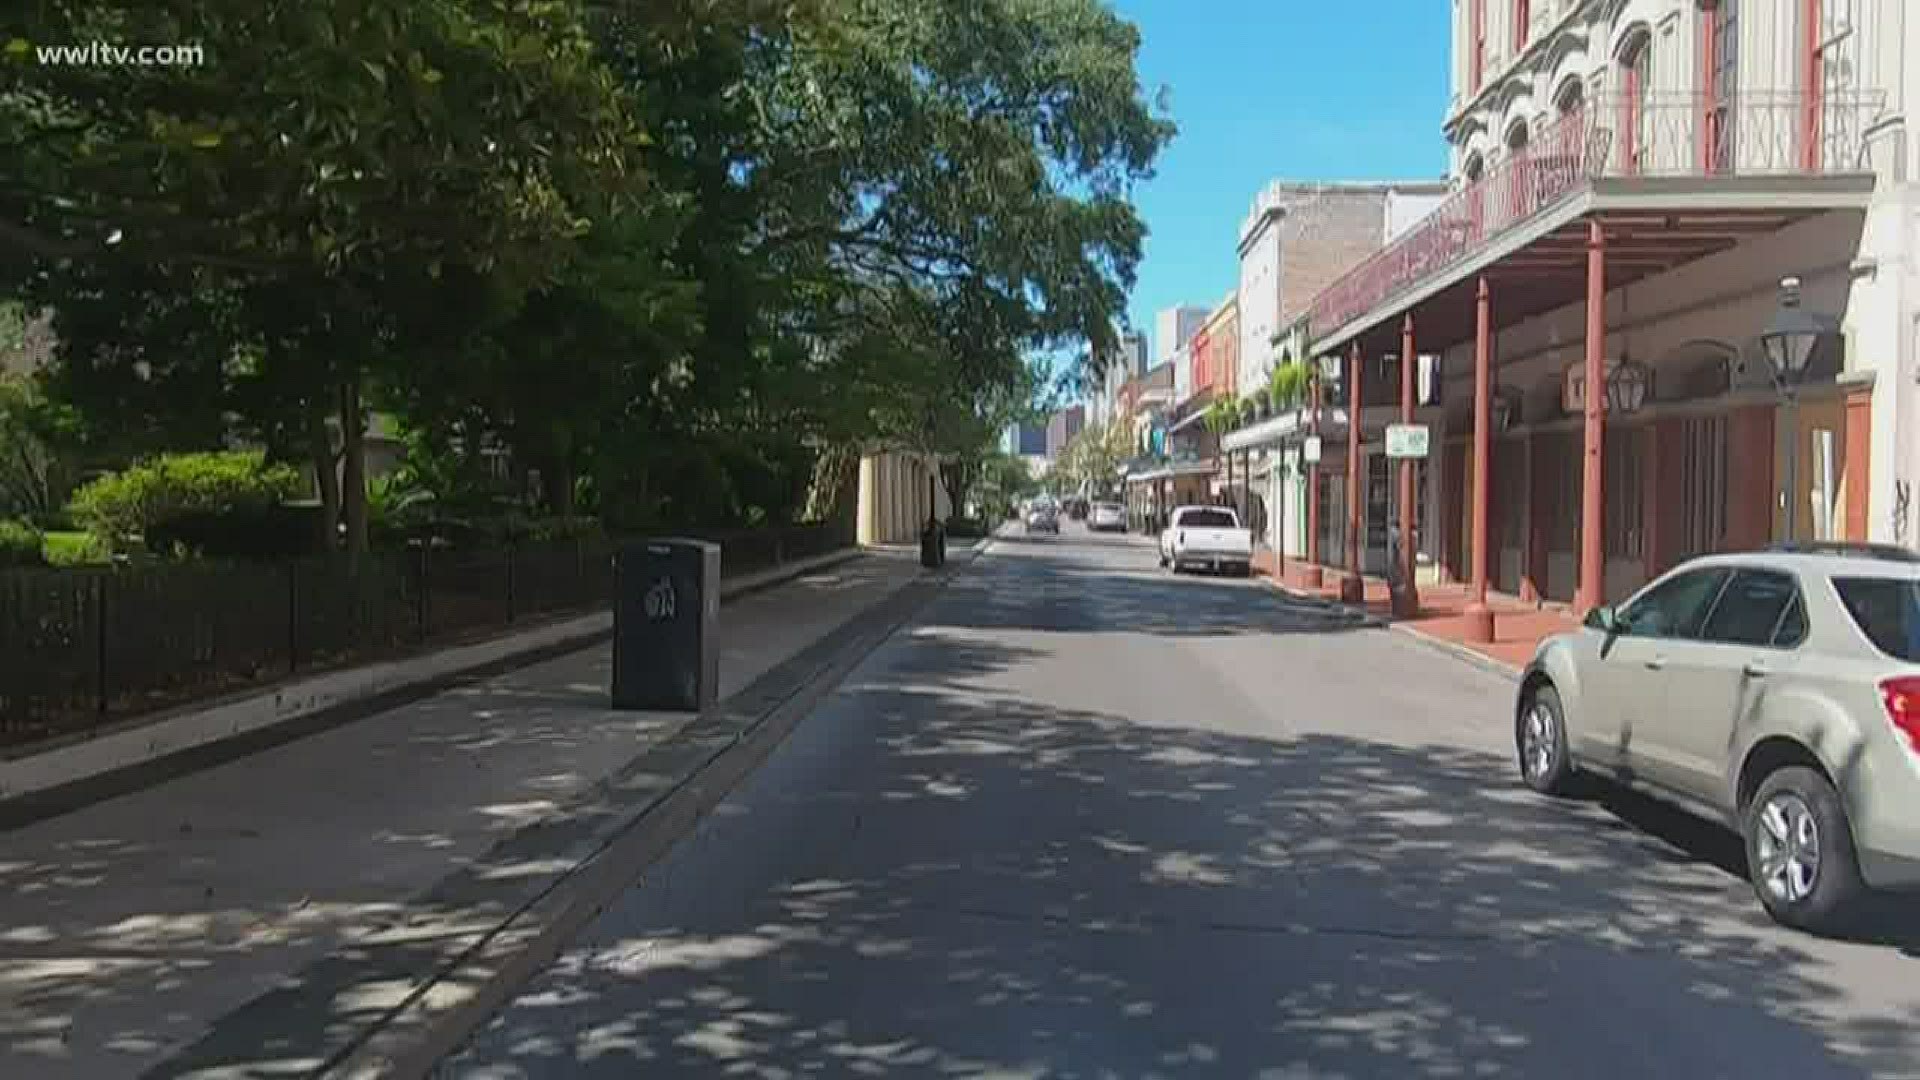 New Orleans is set to start phase one of its reopening on Saturday, May 16.